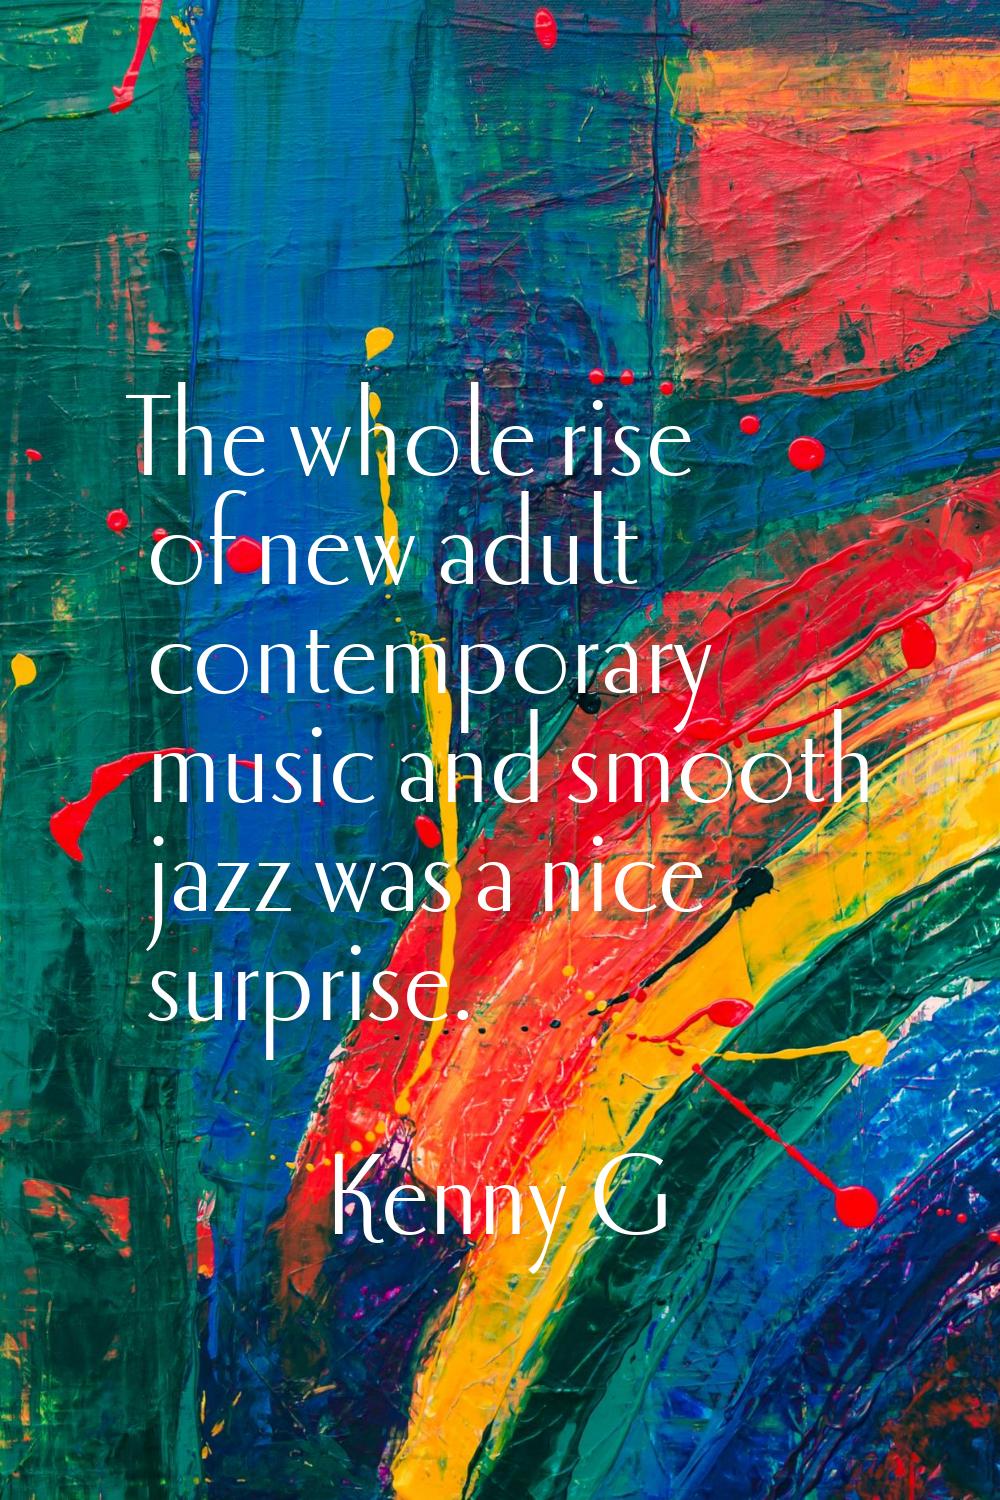 The whole rise of new adult contemporary music and smooth jazz was a nice surprise.